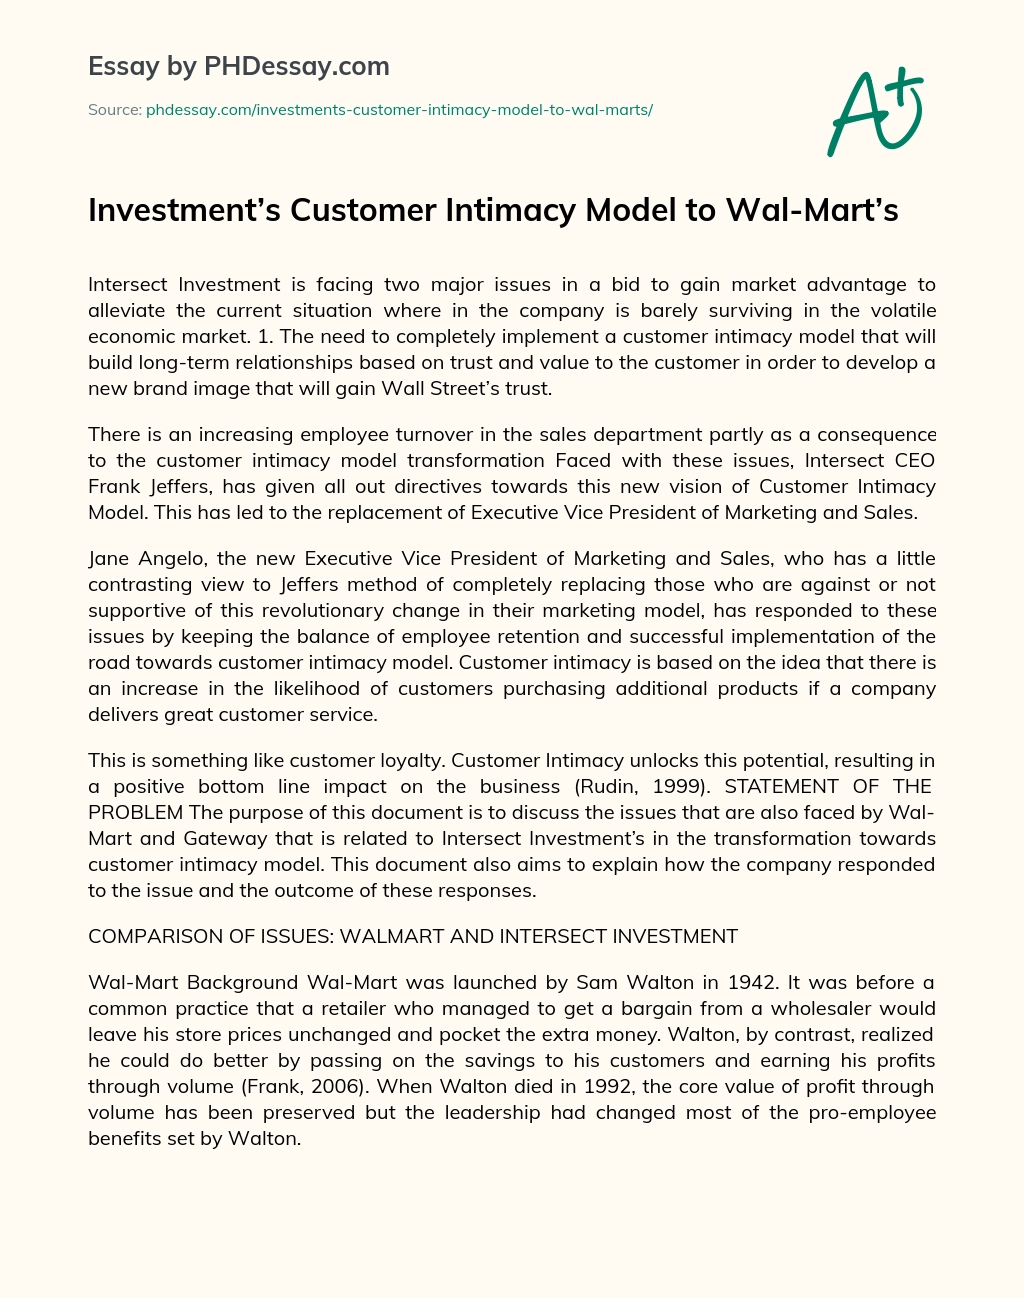 Investment’s Customer Intimacy Model to Wal-Mart’s essay